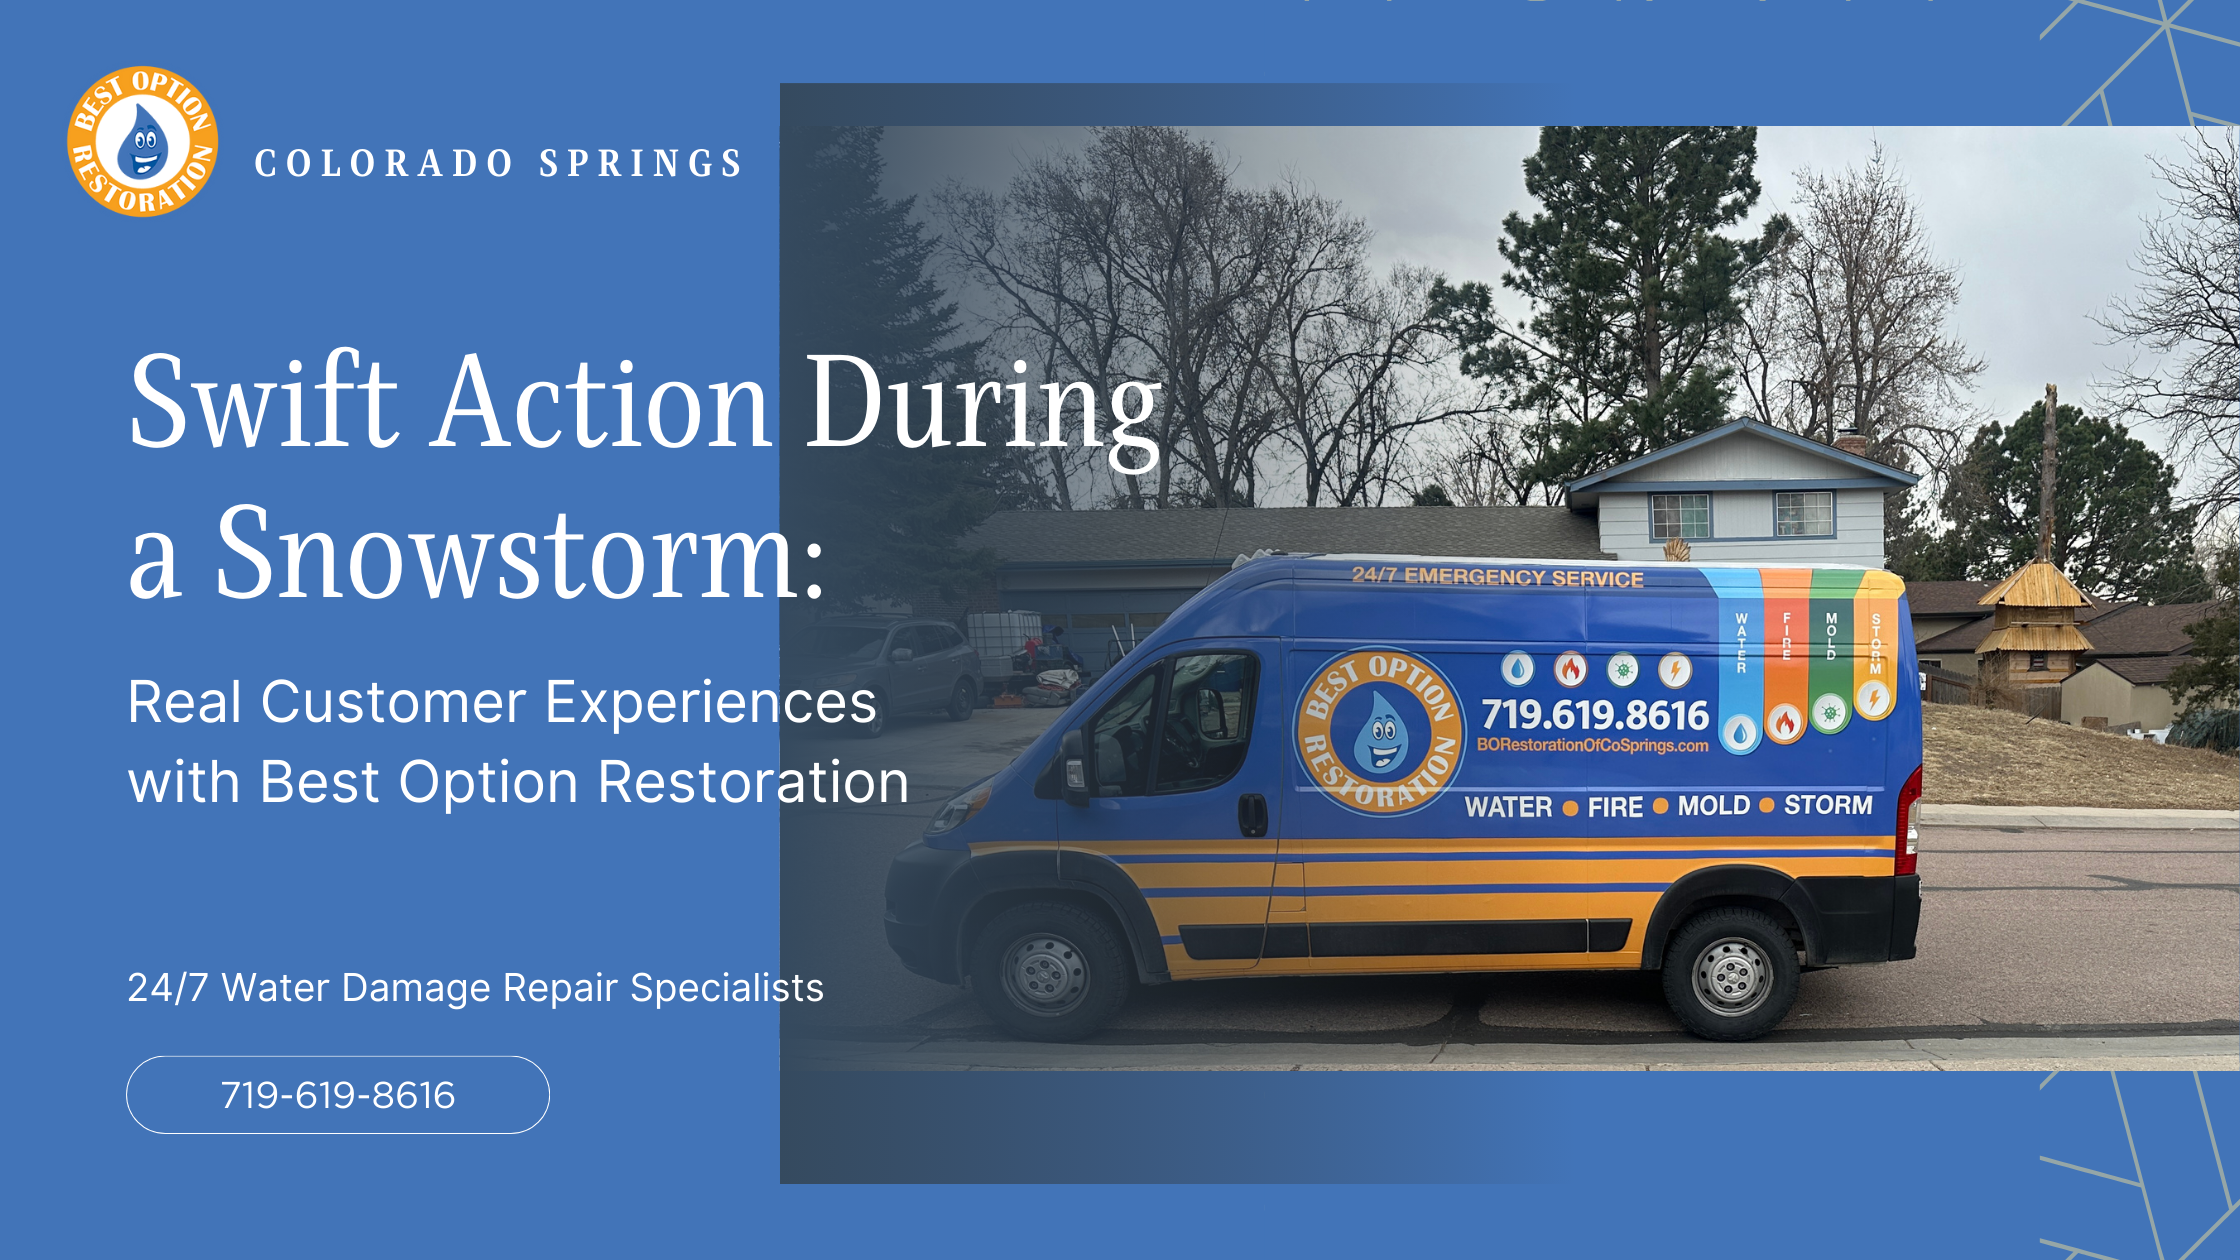 Swift Action During a Snowstorm: Real Customer Experiences with Best Option Restoration